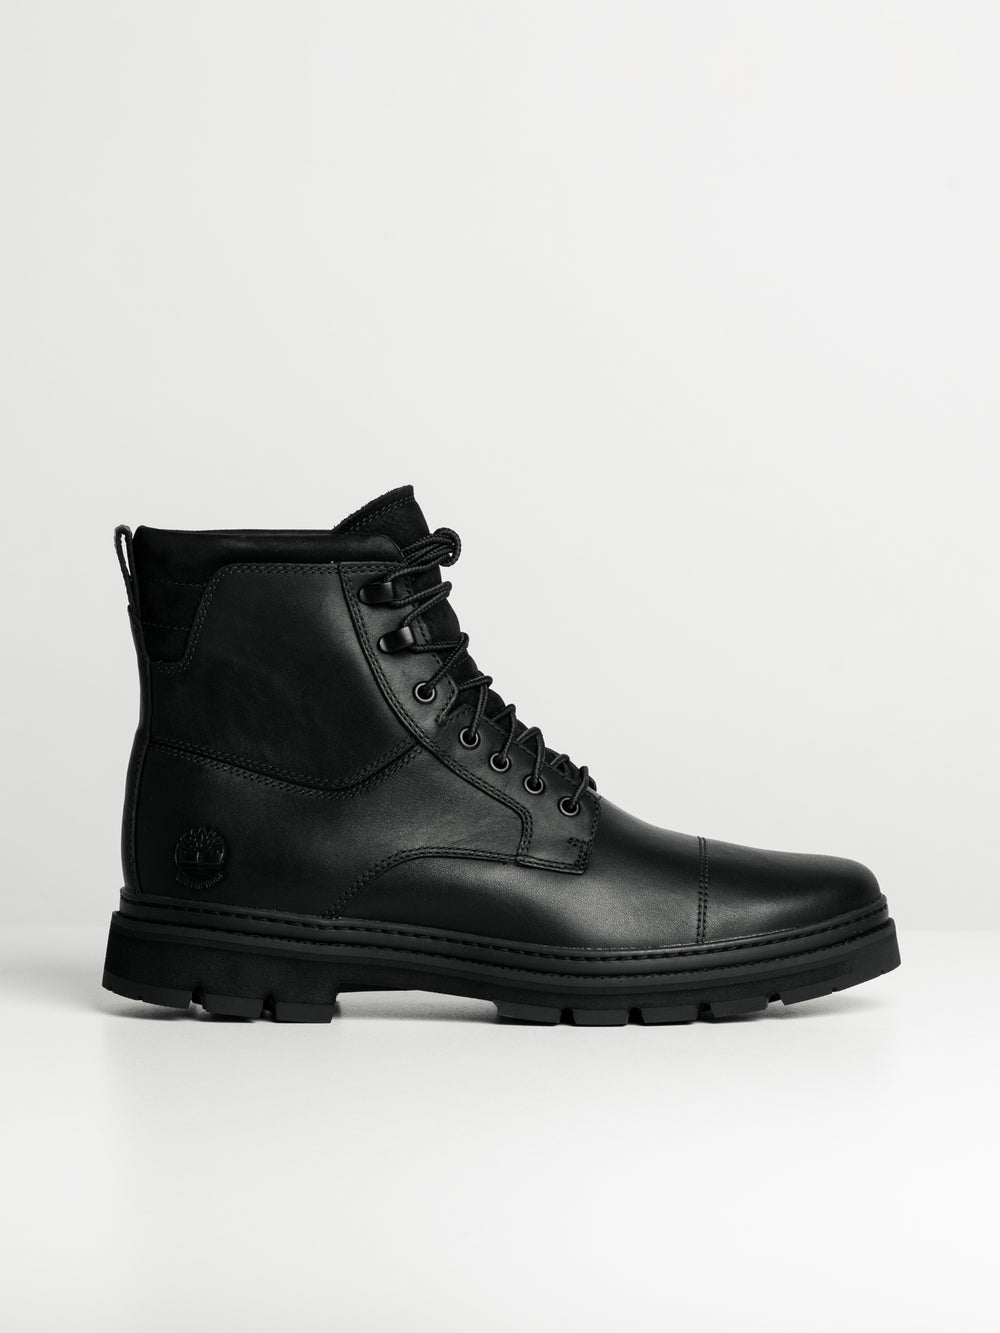 MENS TIMBERLAND PORT UNION WATERPROOF BOOT - CLEARANCE